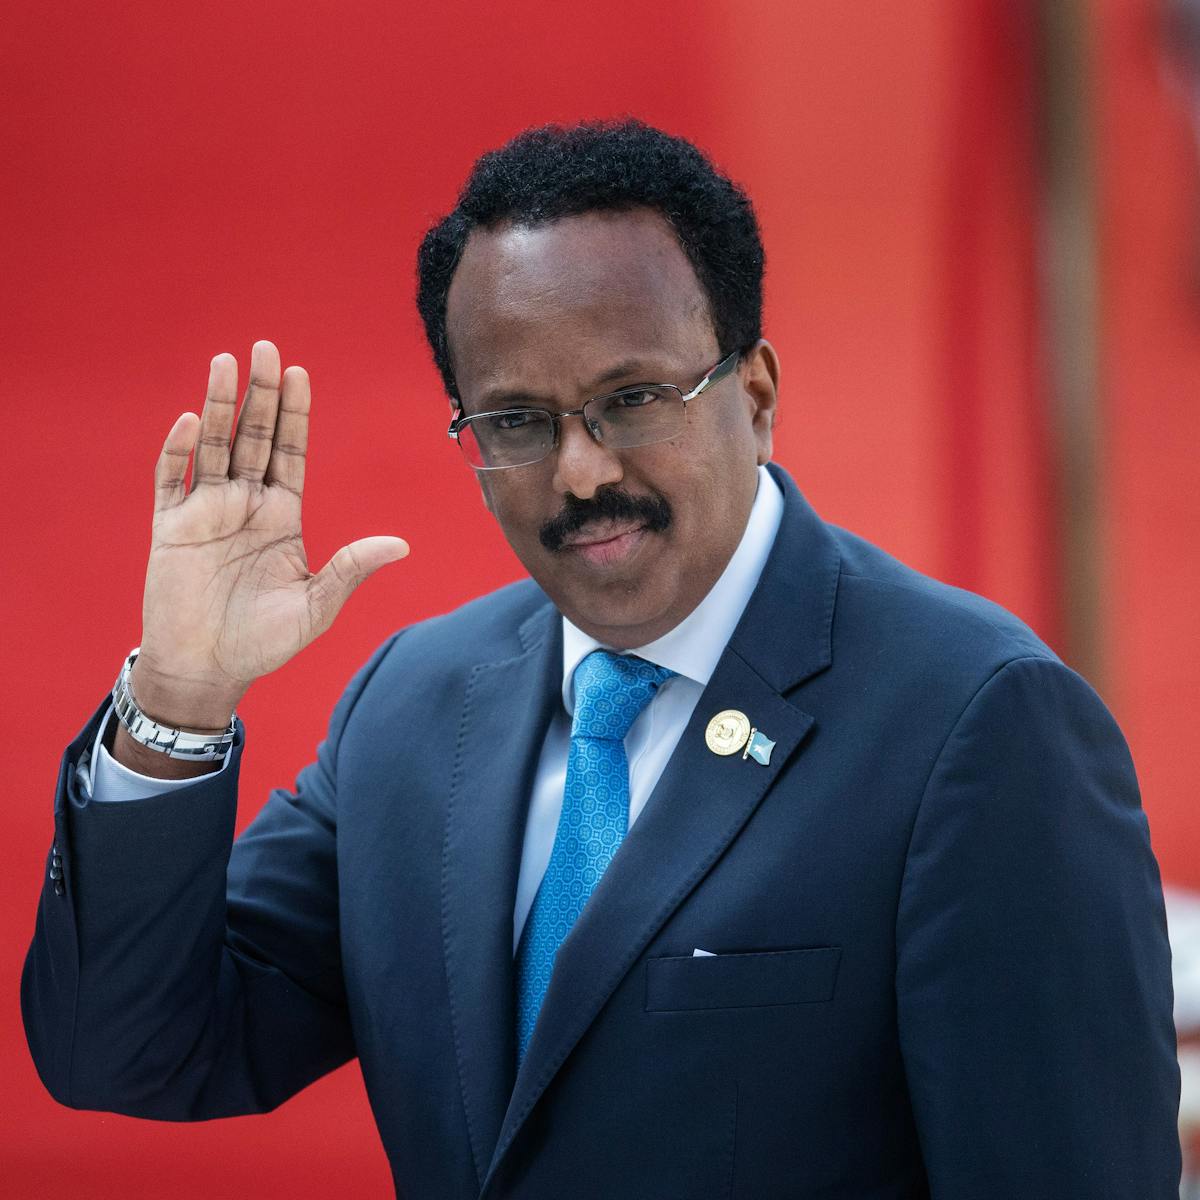 President Mohamed Farmaajo. He controversially extended his term, through the Parliament, by two years. www.theexchange.africa